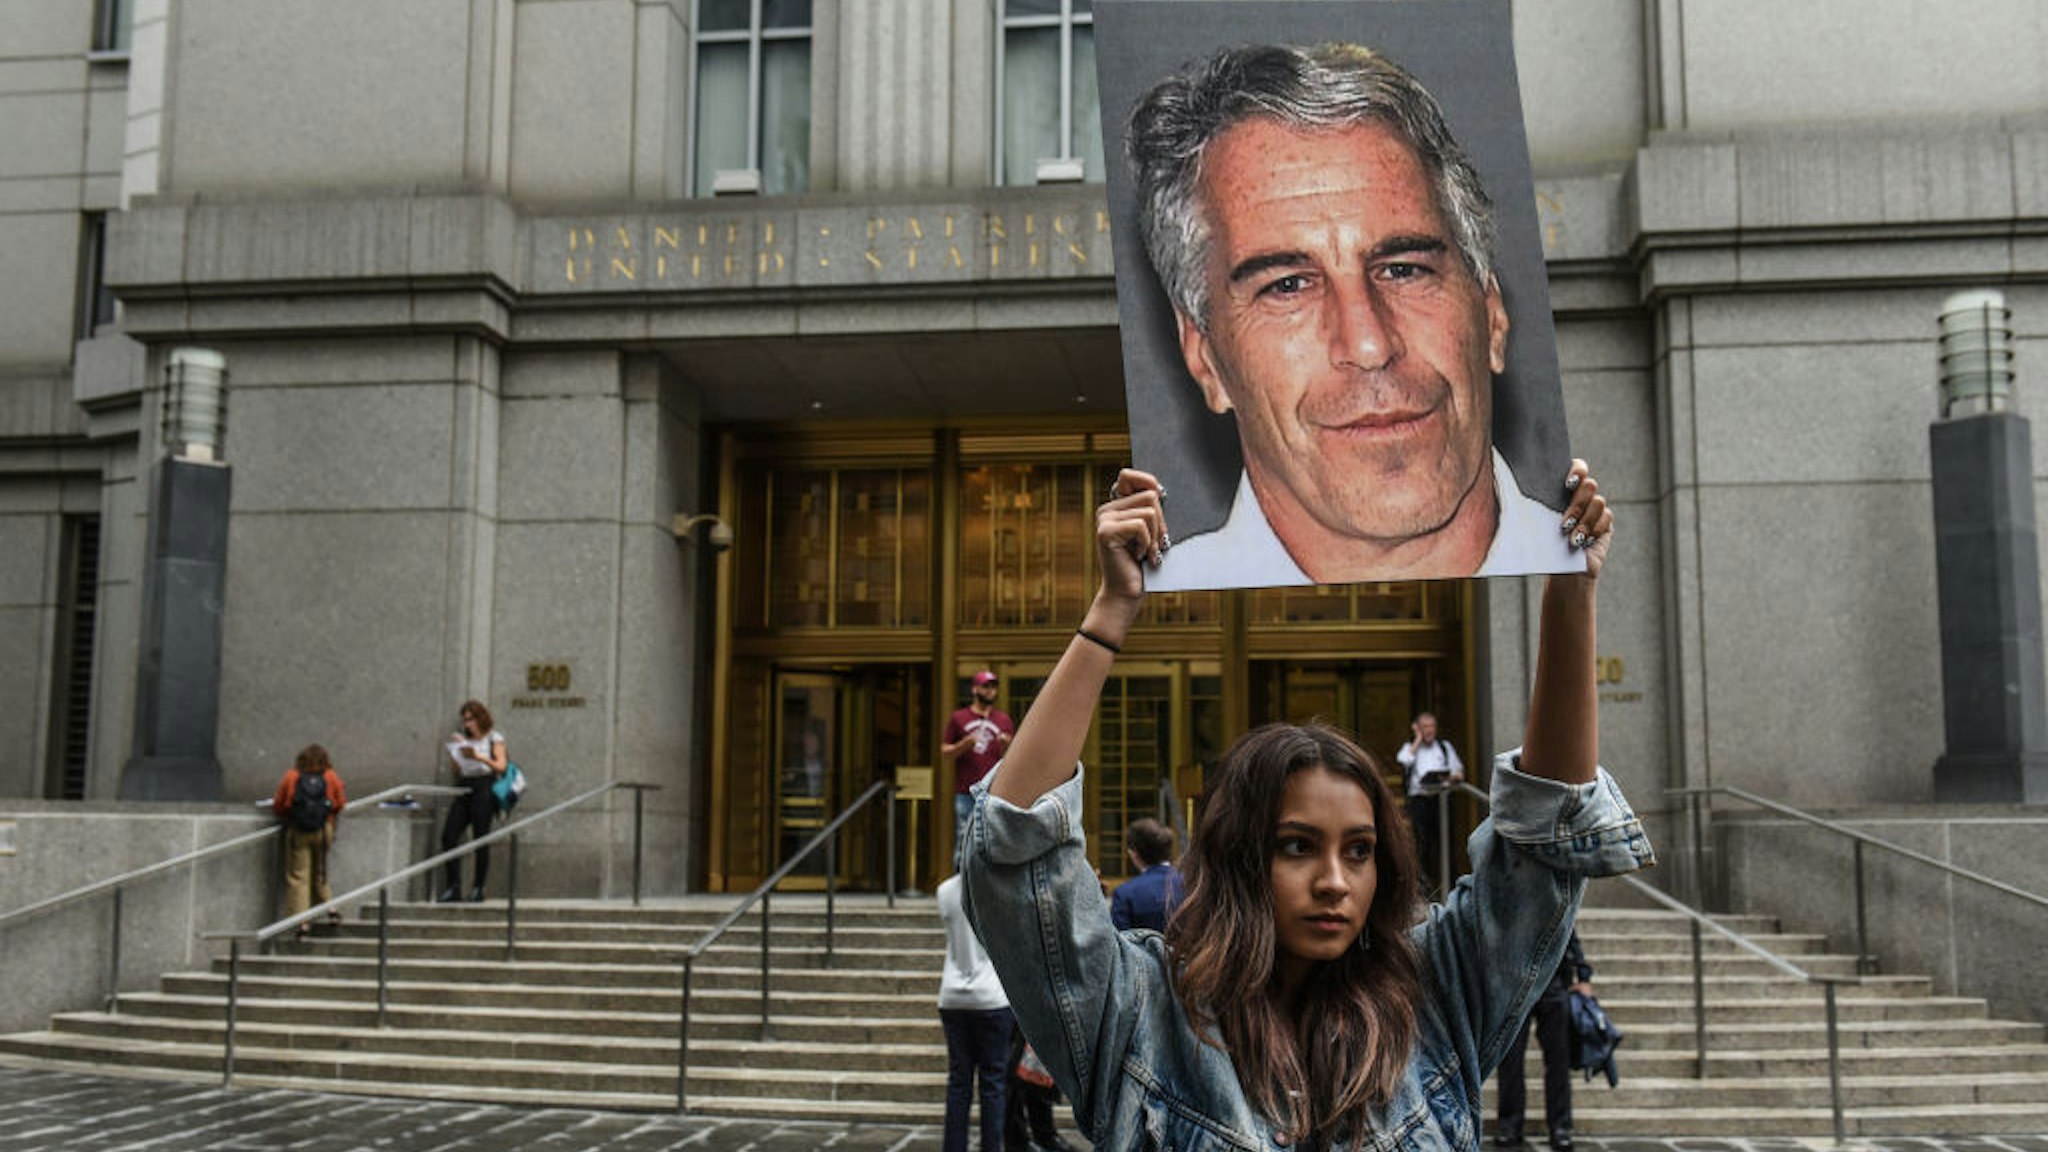 A protest group called "Hot Mess" hold up signs of Jeffrey Epstein in front of the federal courthouse on July 8, 2019 in New York City.